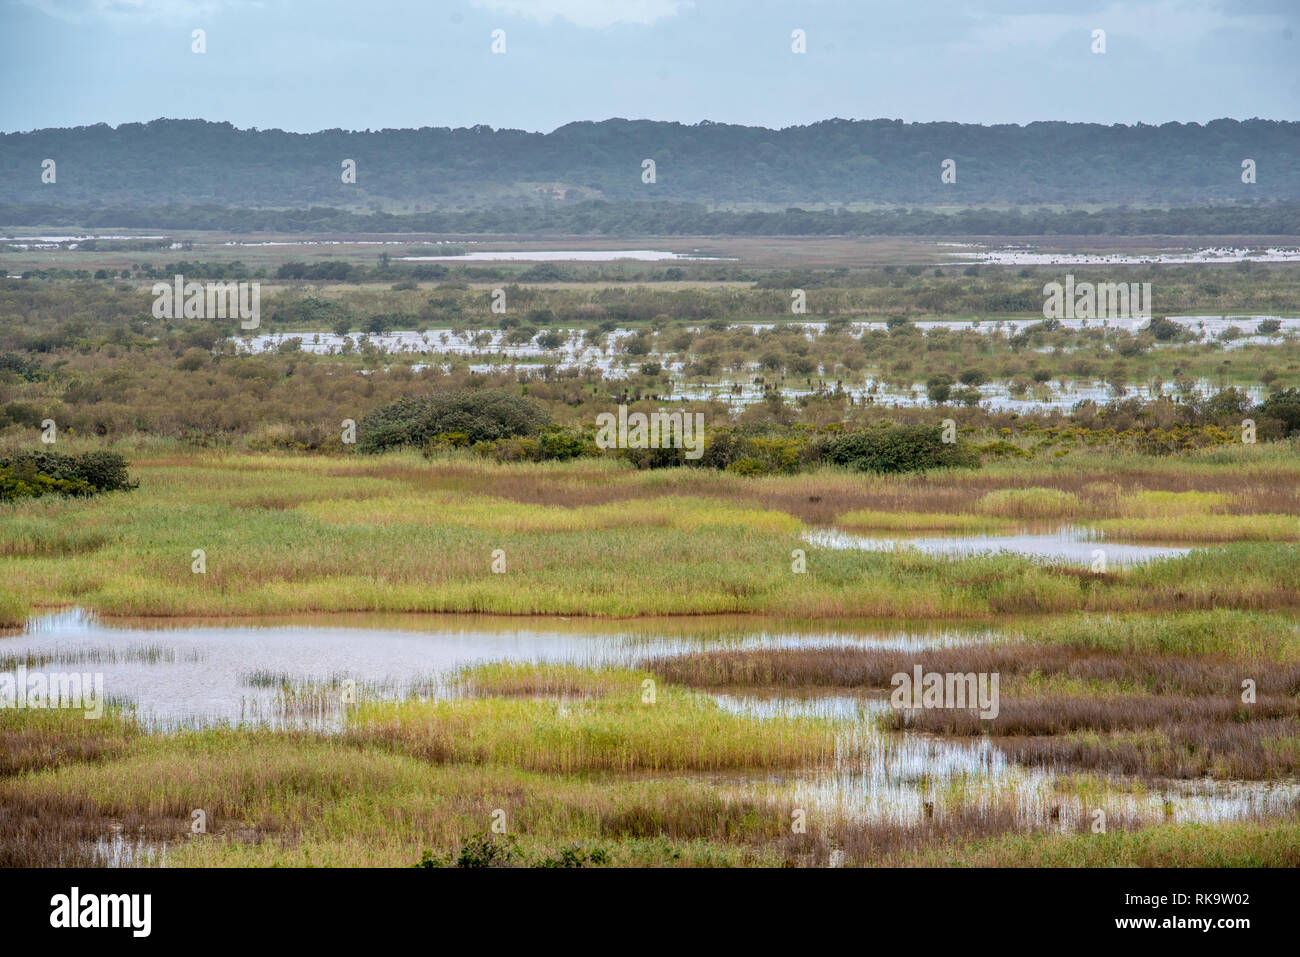 A wide views of the marshes in the western shores park of lake St Lucia in Isimangaliso Wetland Park, South Africa Stock Photo